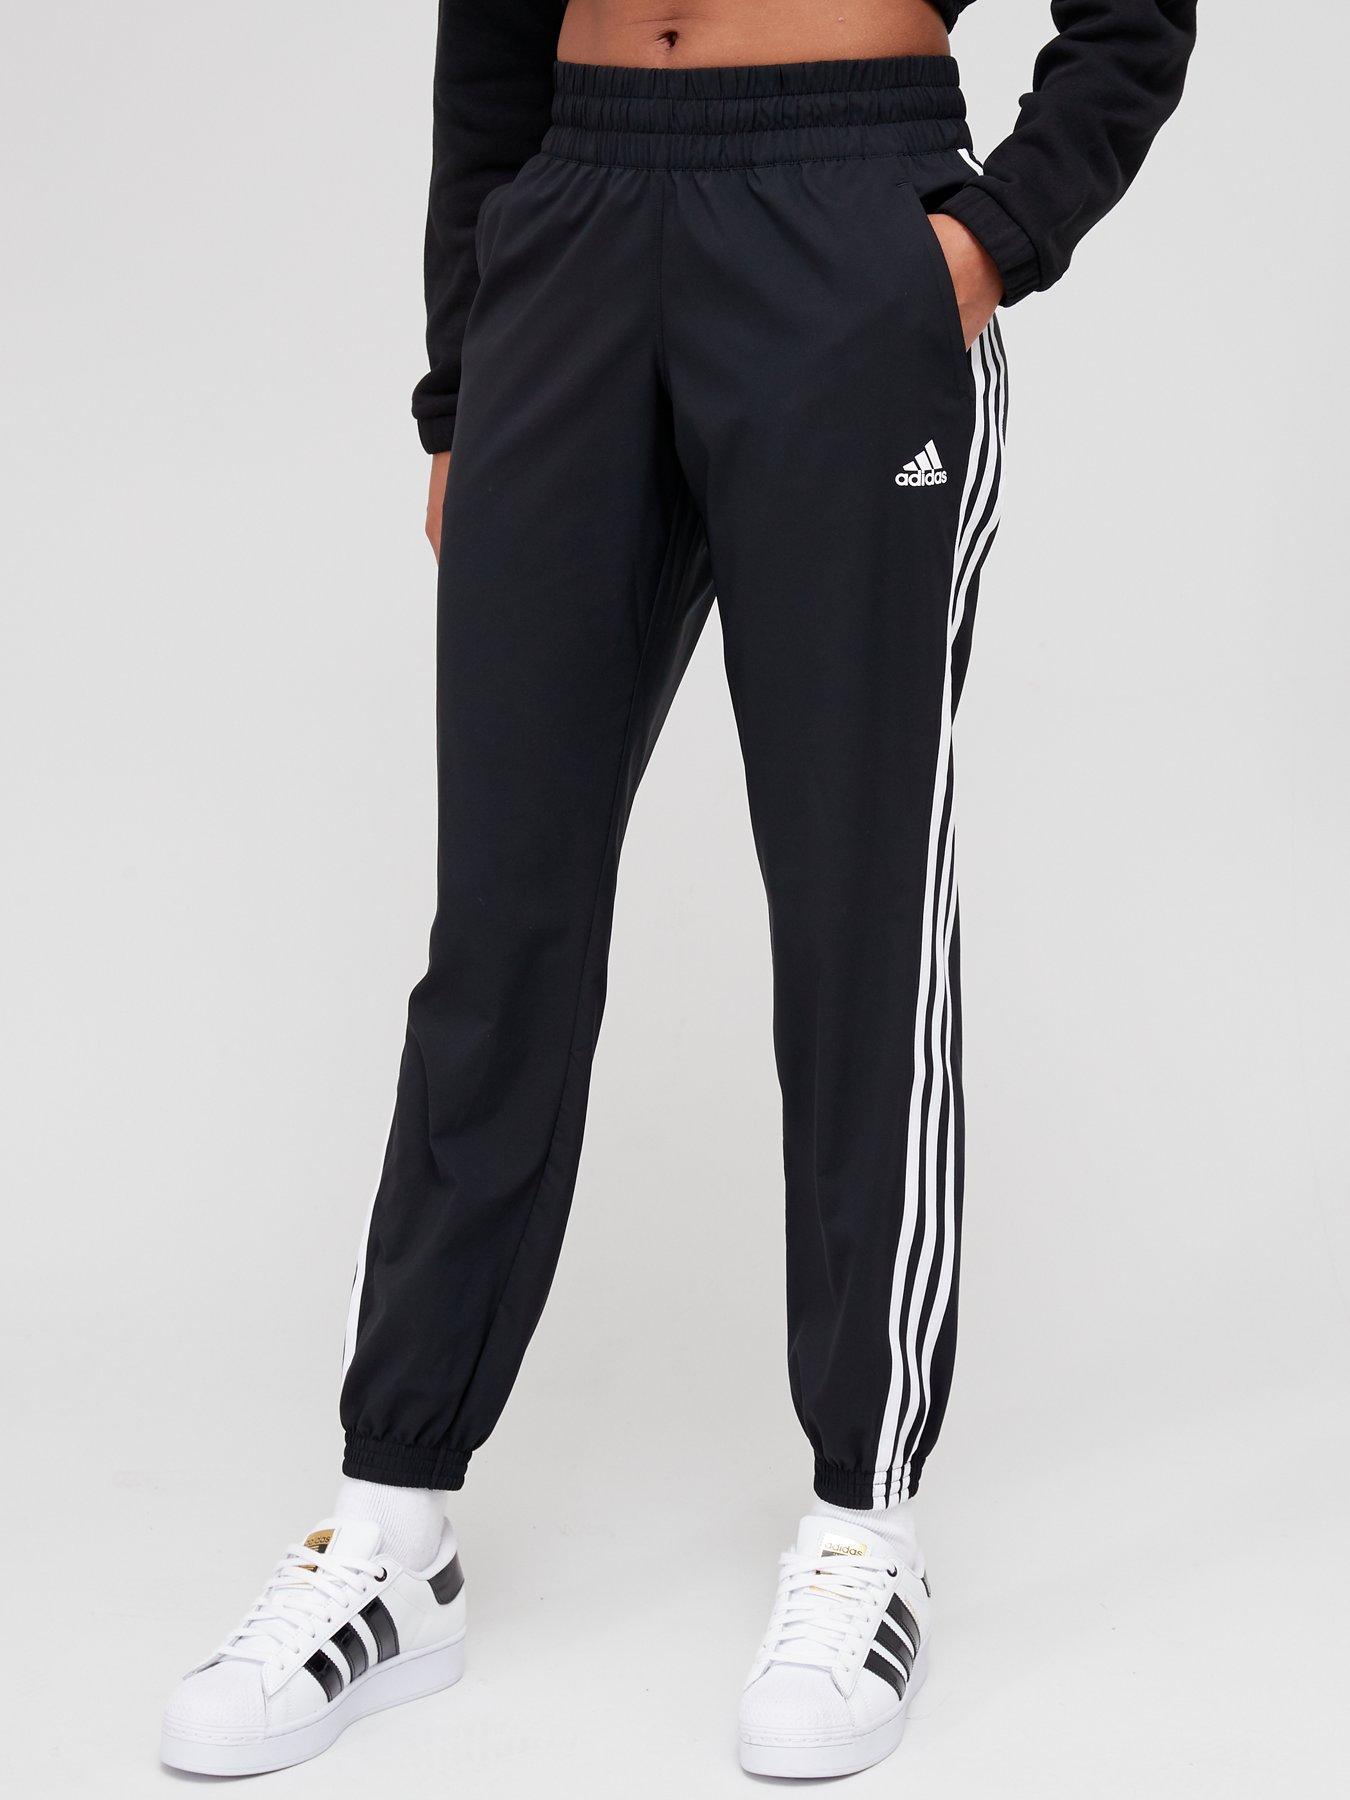 discount 64% Adidas tracksuit and joggers WOMEN FASHION Trousers Tracksuit and joggers Flared Black L 